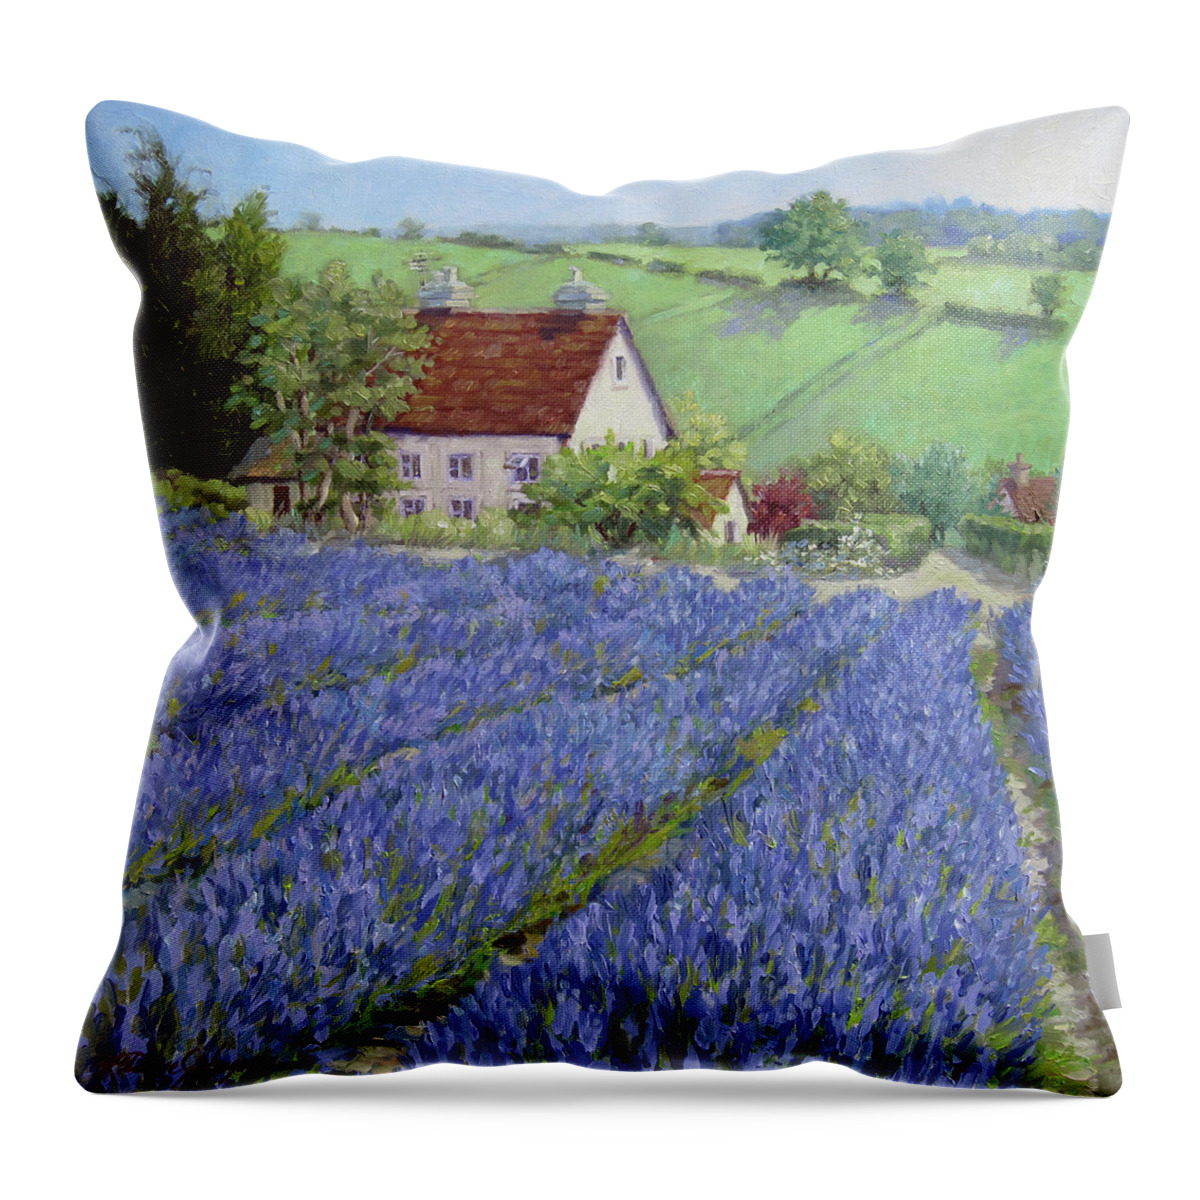 England Landscape Throw Pillow featuring the painting Lavender Hill by L Diane Johnson